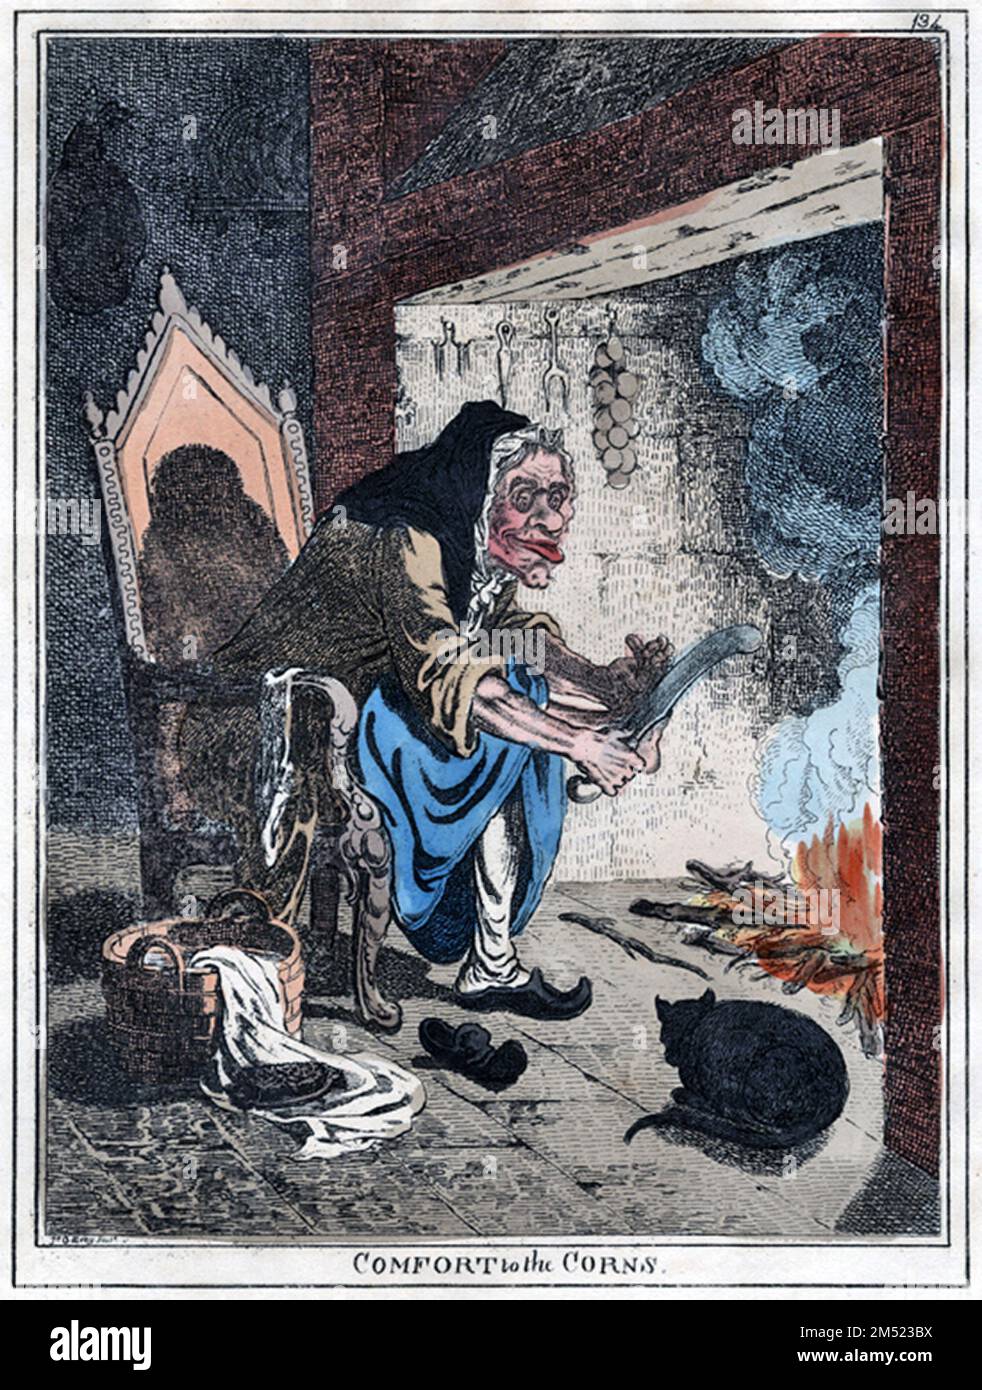 James Gillray, true to the form of caricature, exaggerates the size of the woman's features and the knife she uses to rid herself of corns. Published 1800 Stock Photo